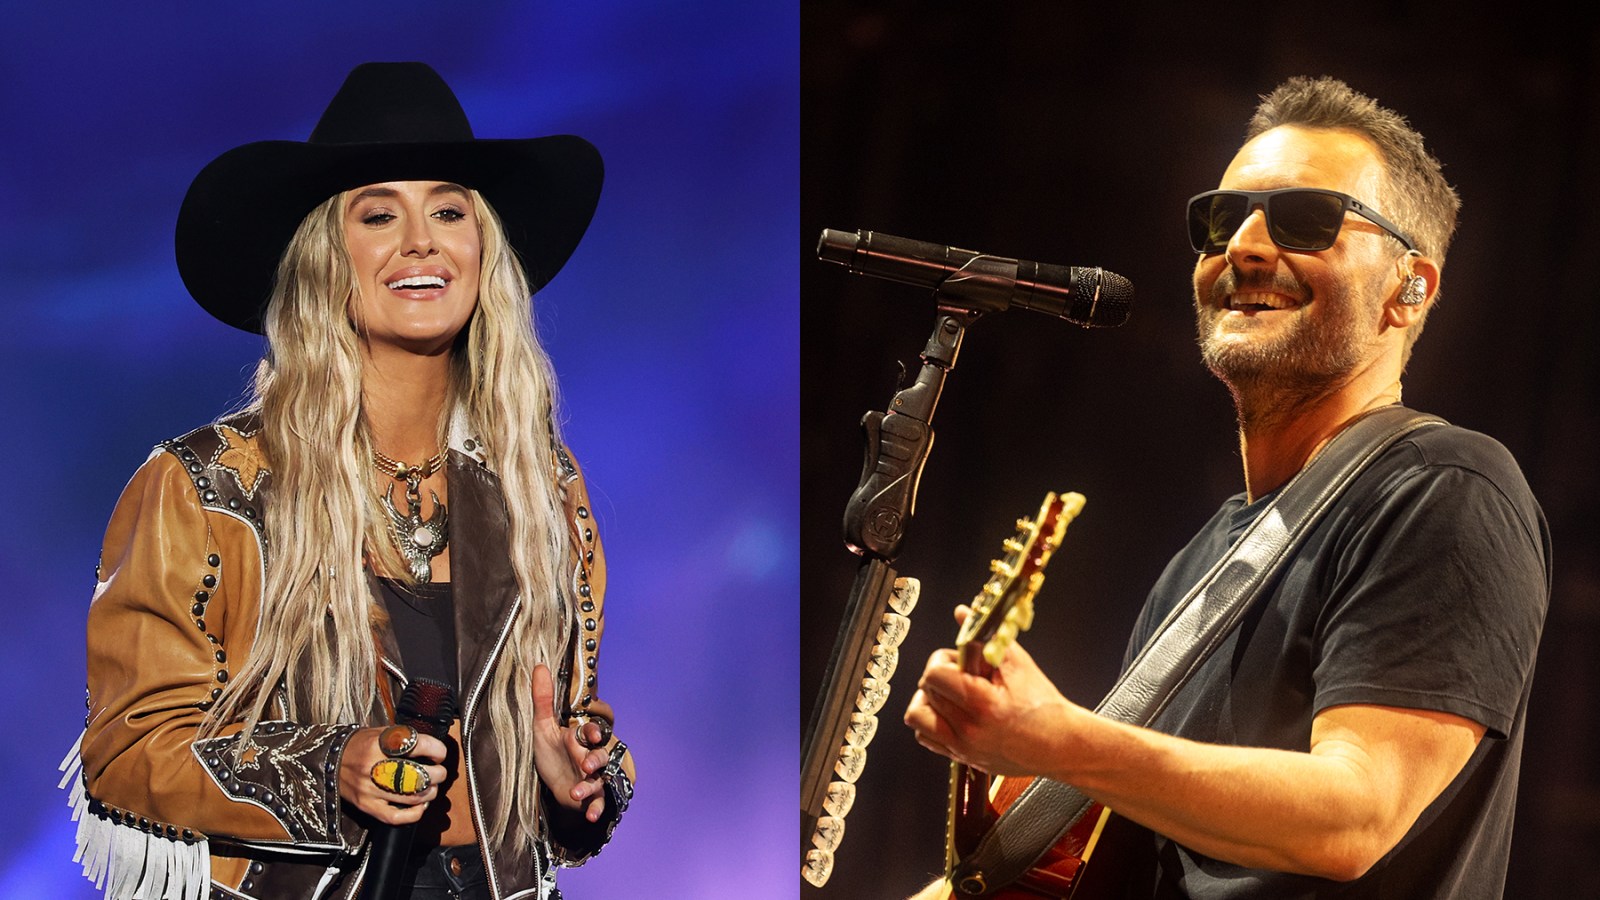 Lainey Wilson and Eric Church Are Headlining the First Field & Stream Music Festival